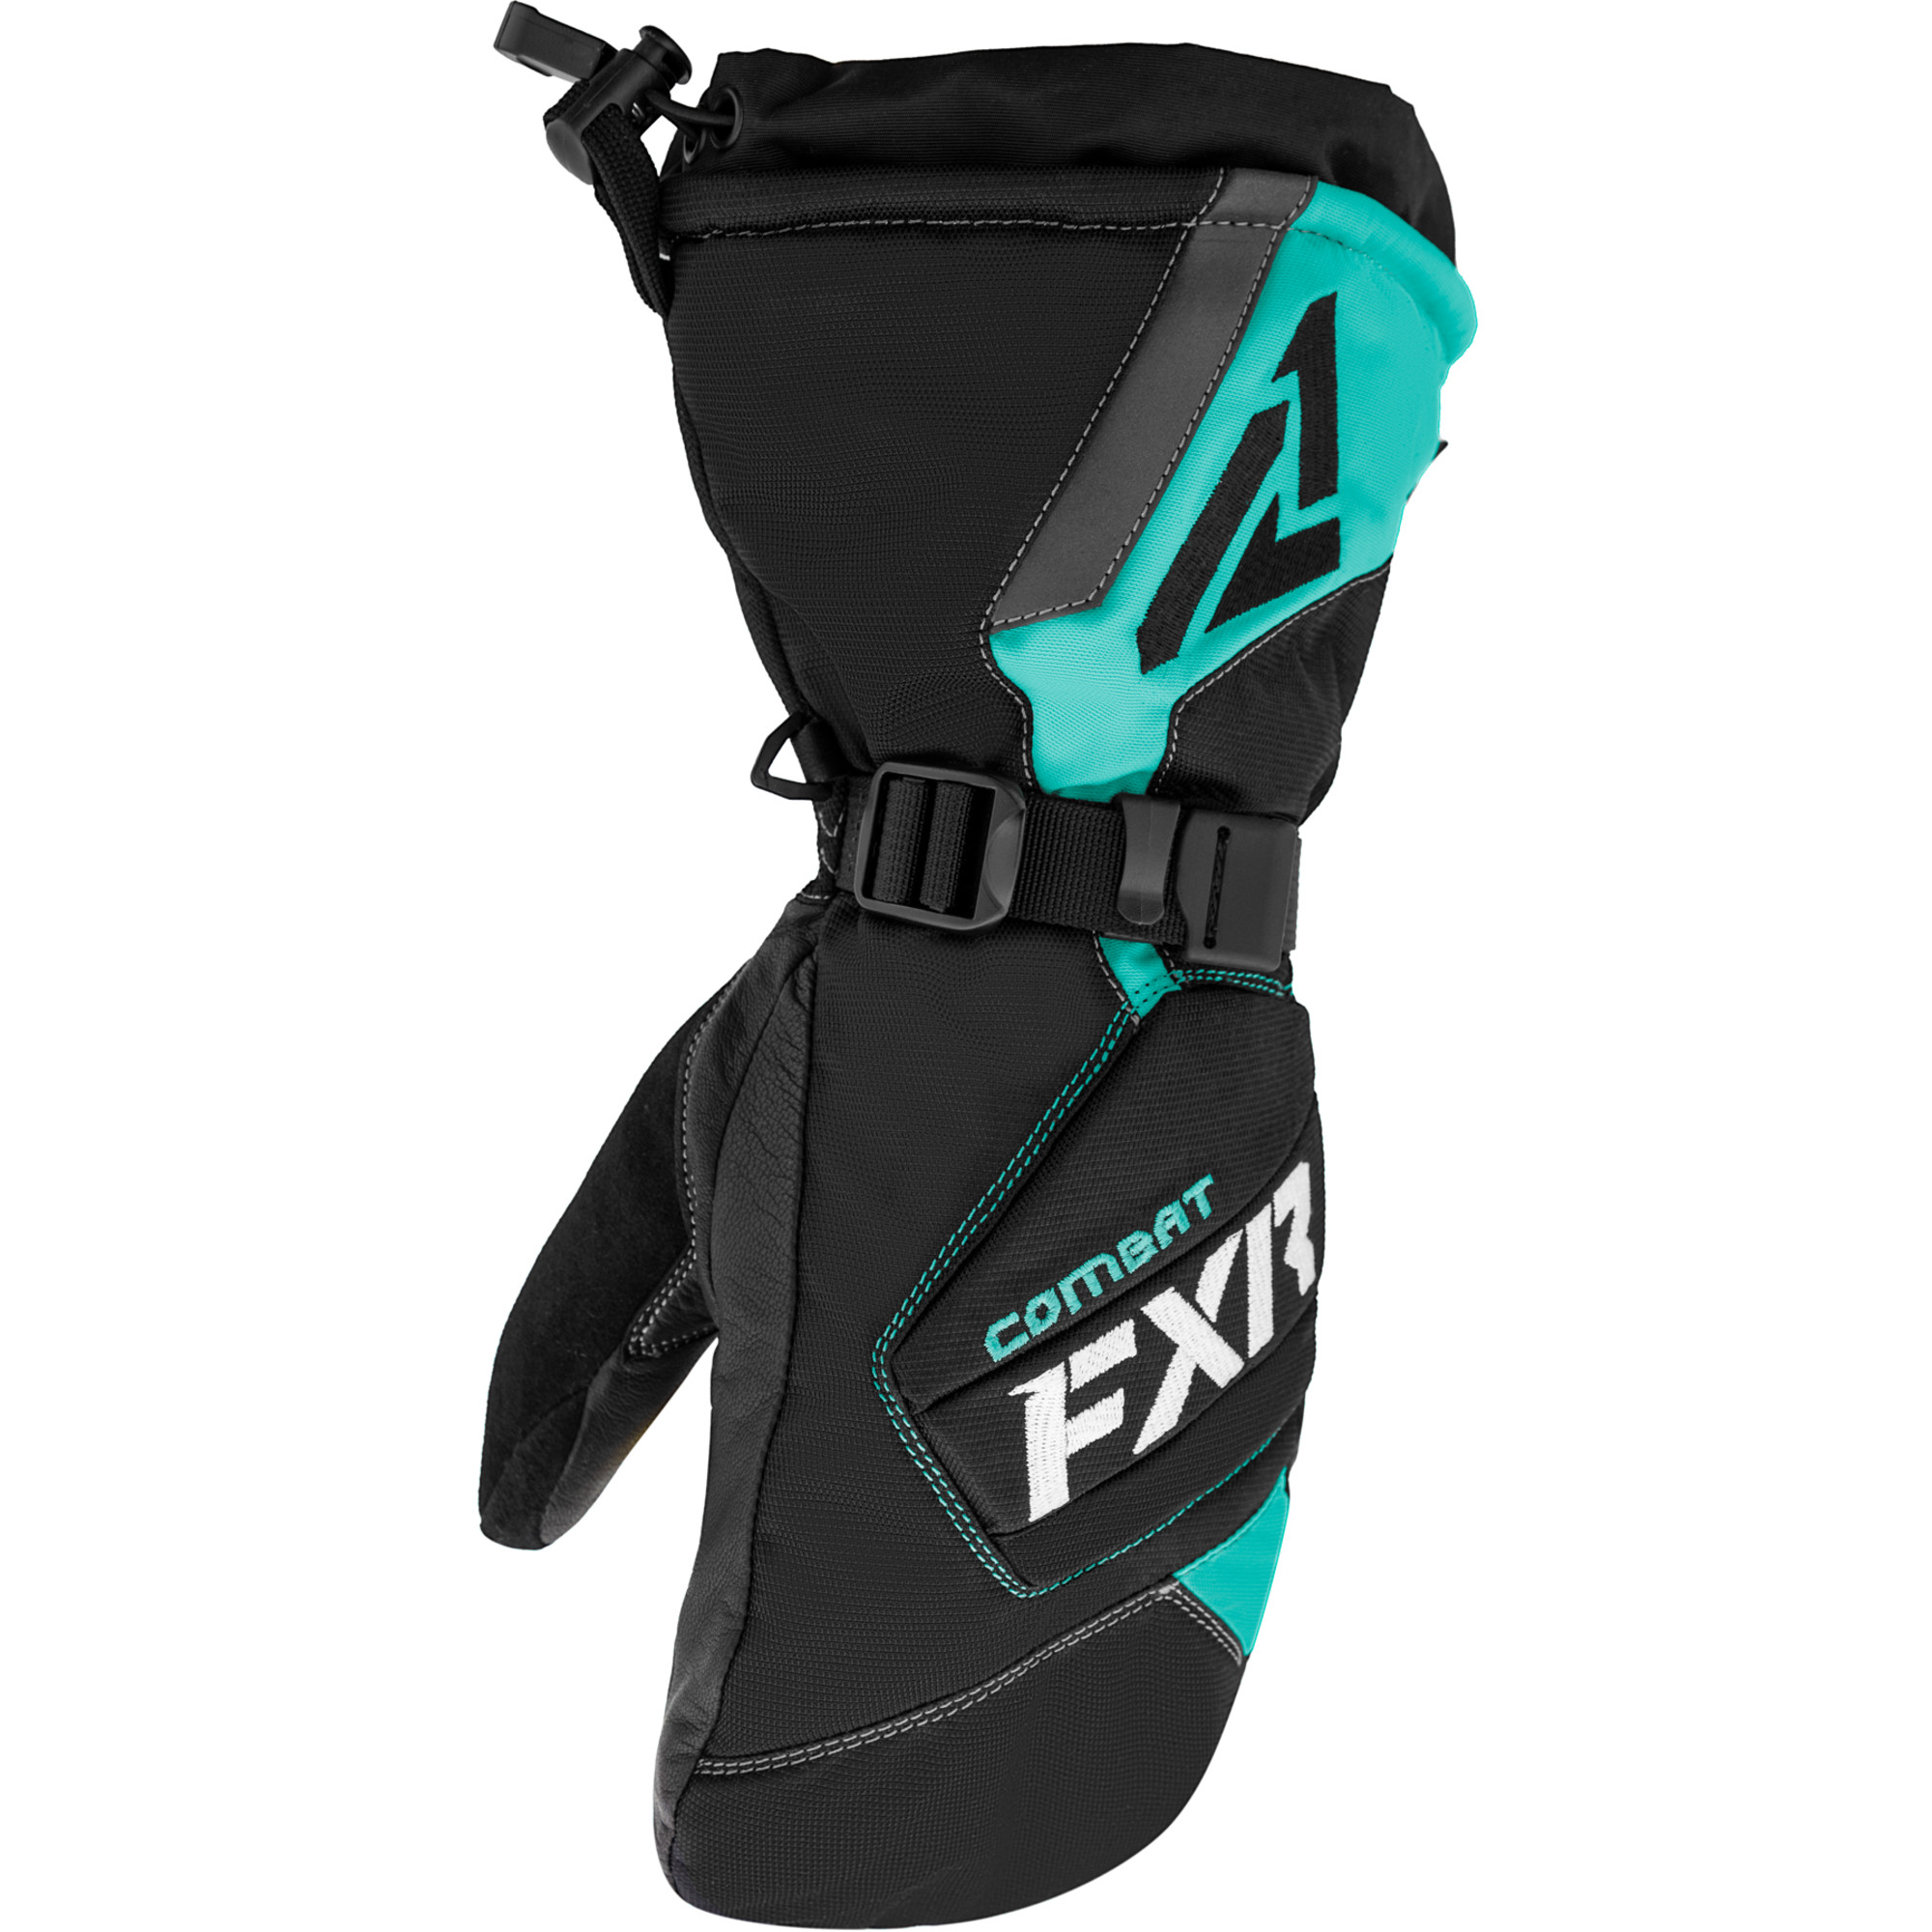 fxr racing mitts gloves for womens combat